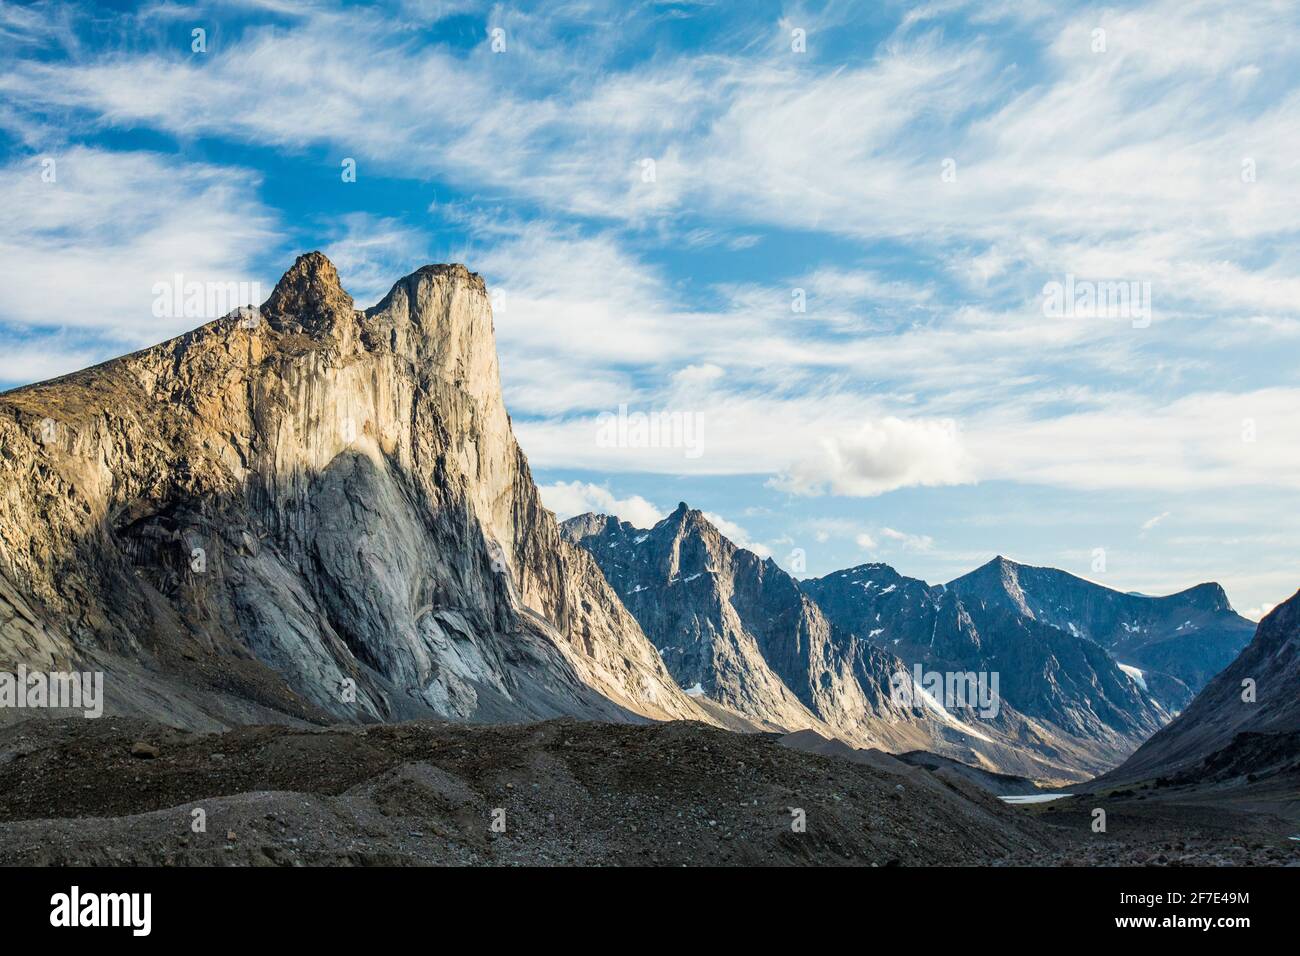 Granite cliff face of Mount Thor, Baffin Island, Canada. Stock Photo